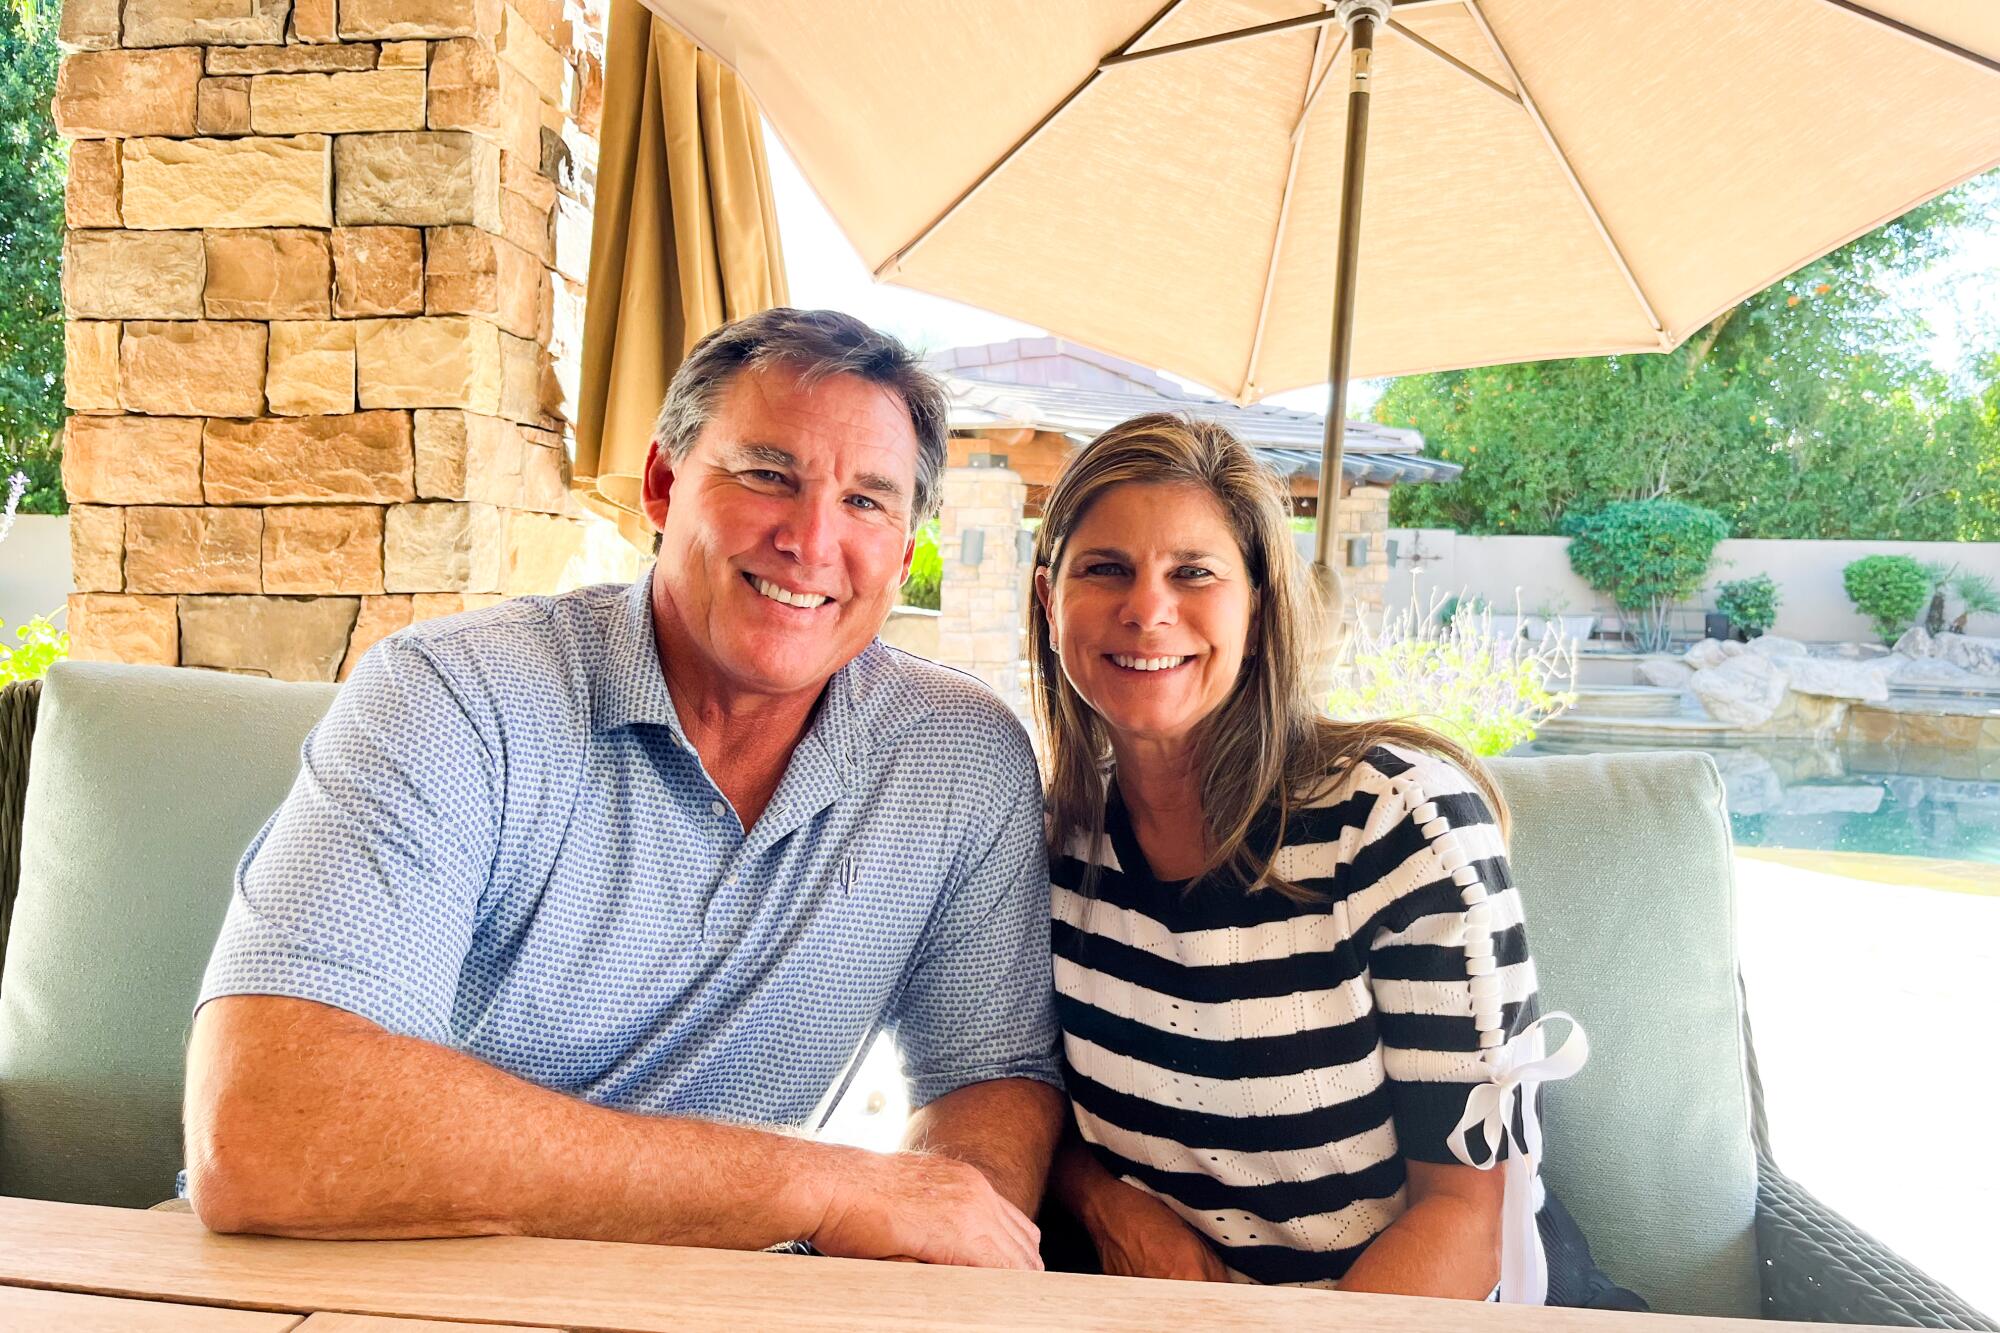 Tim Salmon, left, poses for a photo with his wife Marci Salmon on back patio of their Scottsdale home